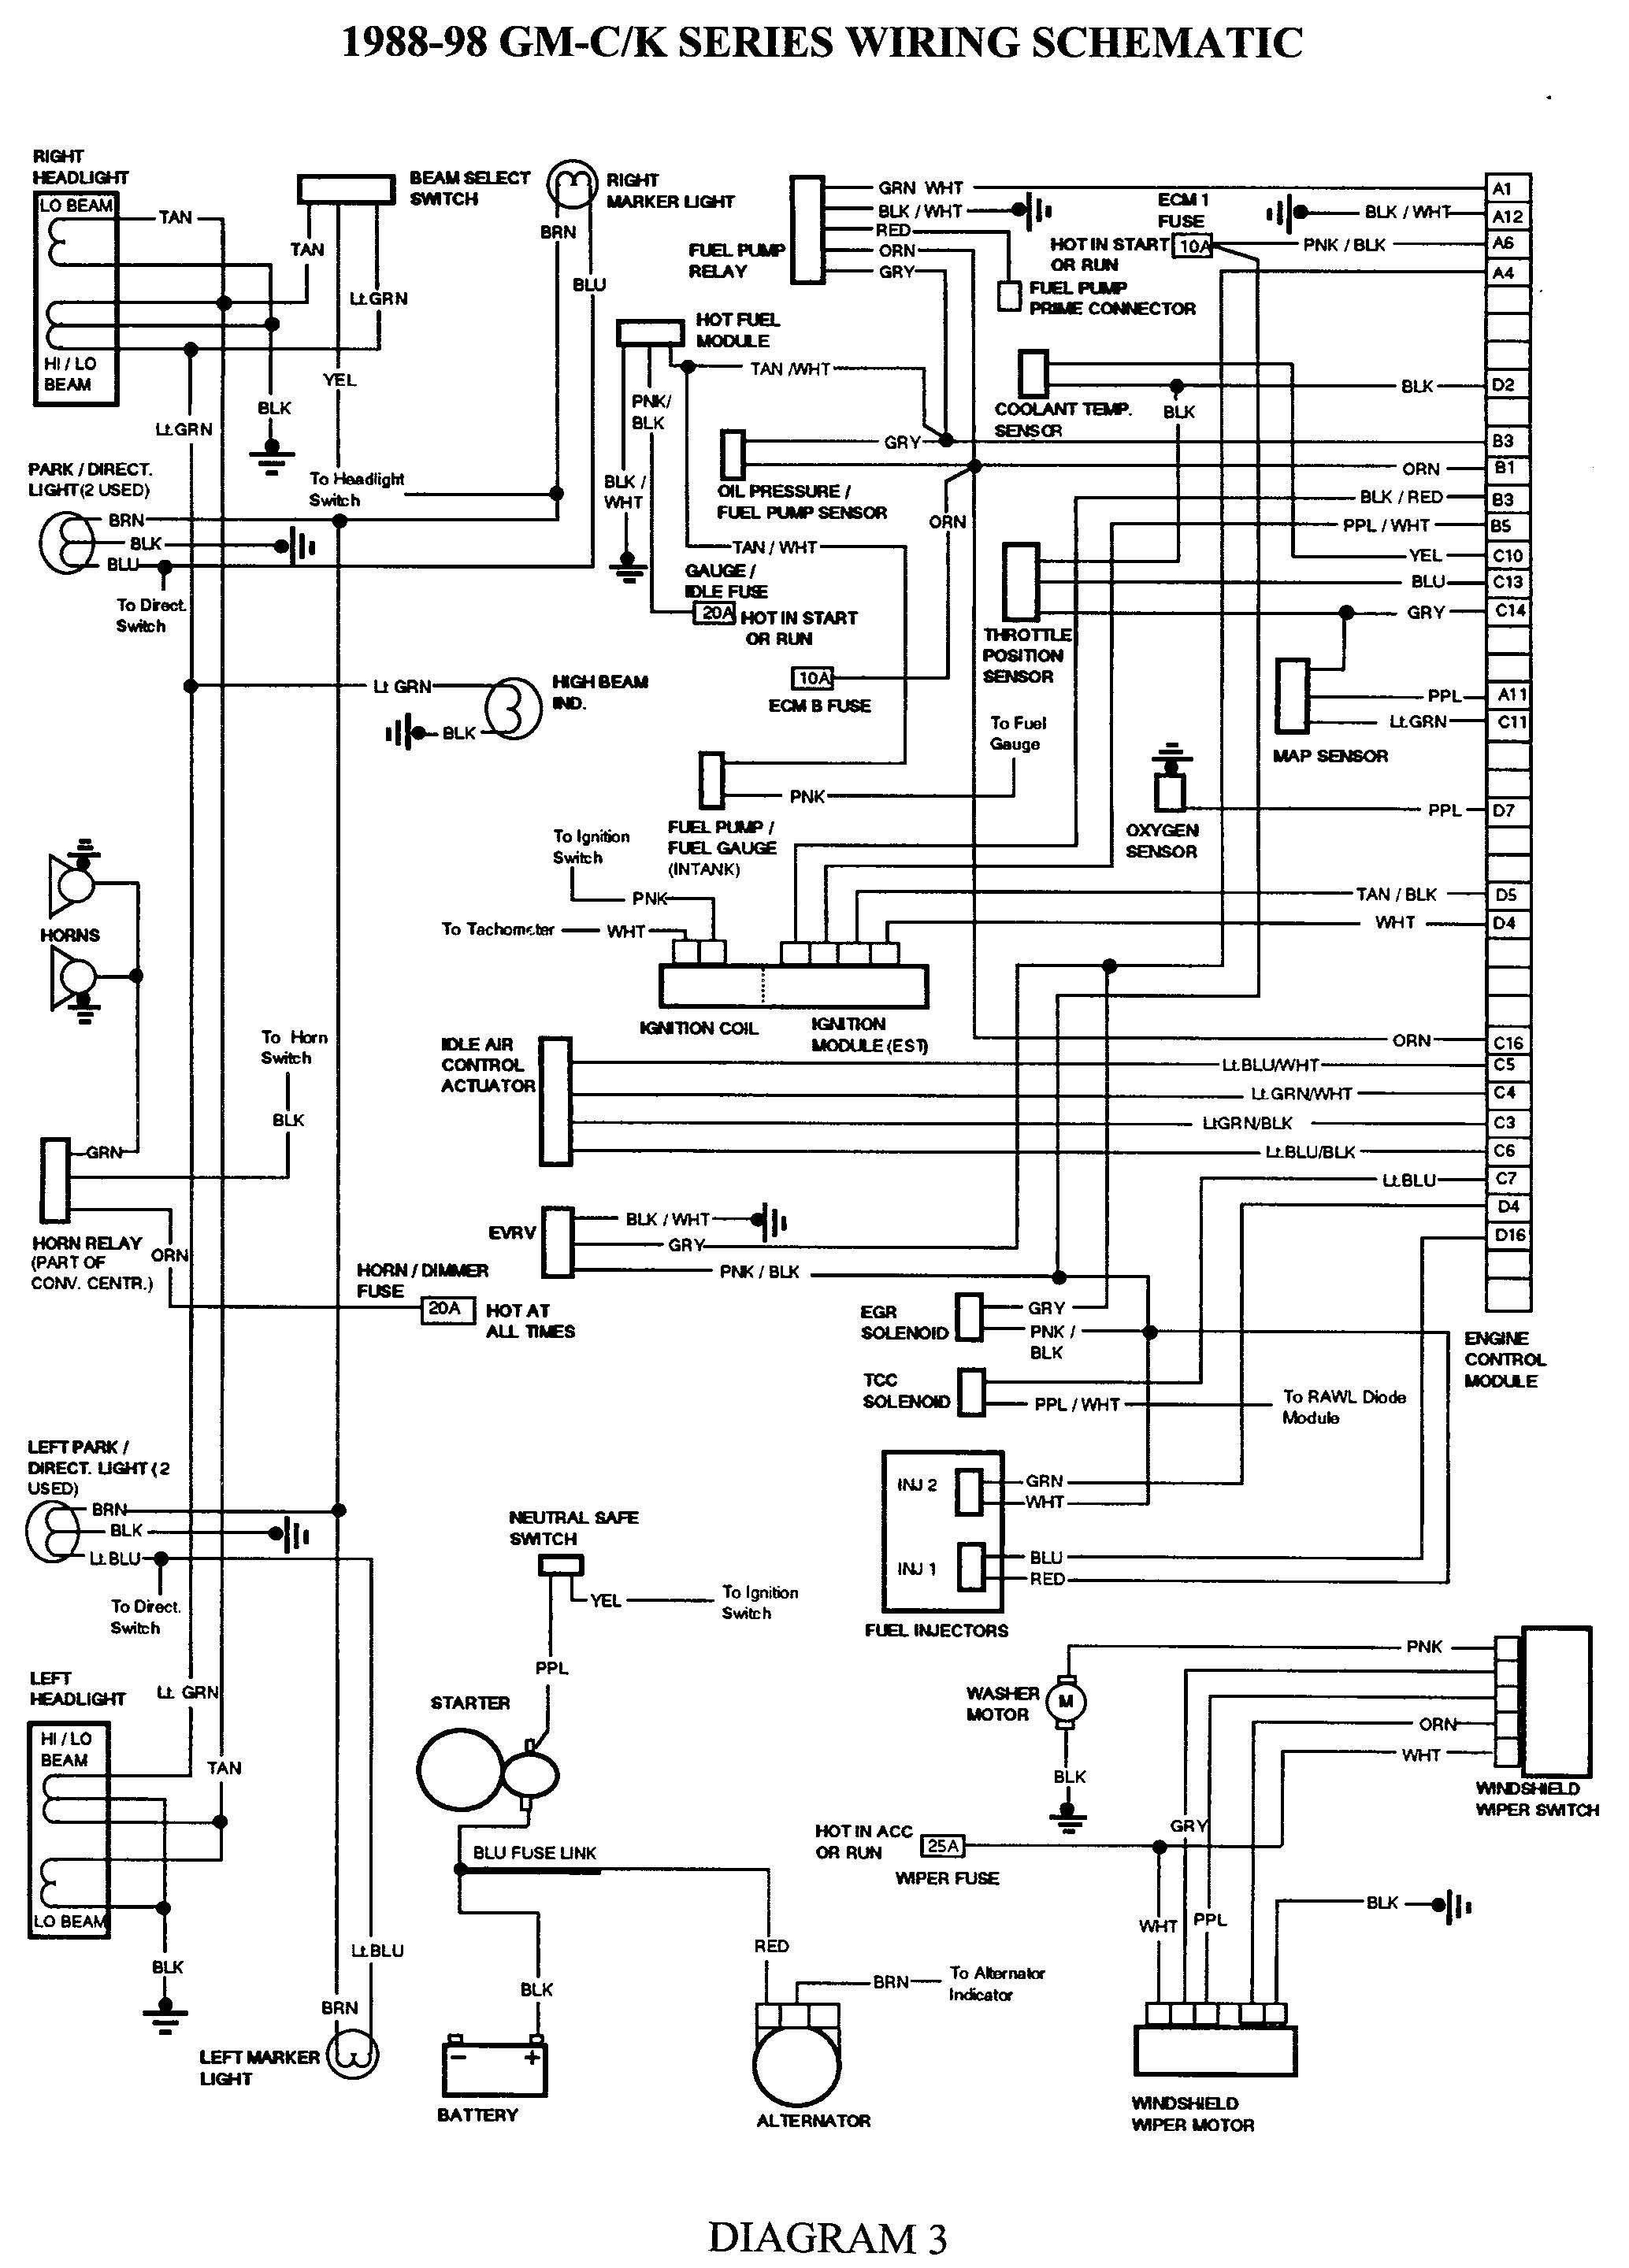 Gmc Truck Wiring Diagrams On Gm Wiring Harness Diagram 88 98 | Kc - Chevy Wiring Harness Diagram